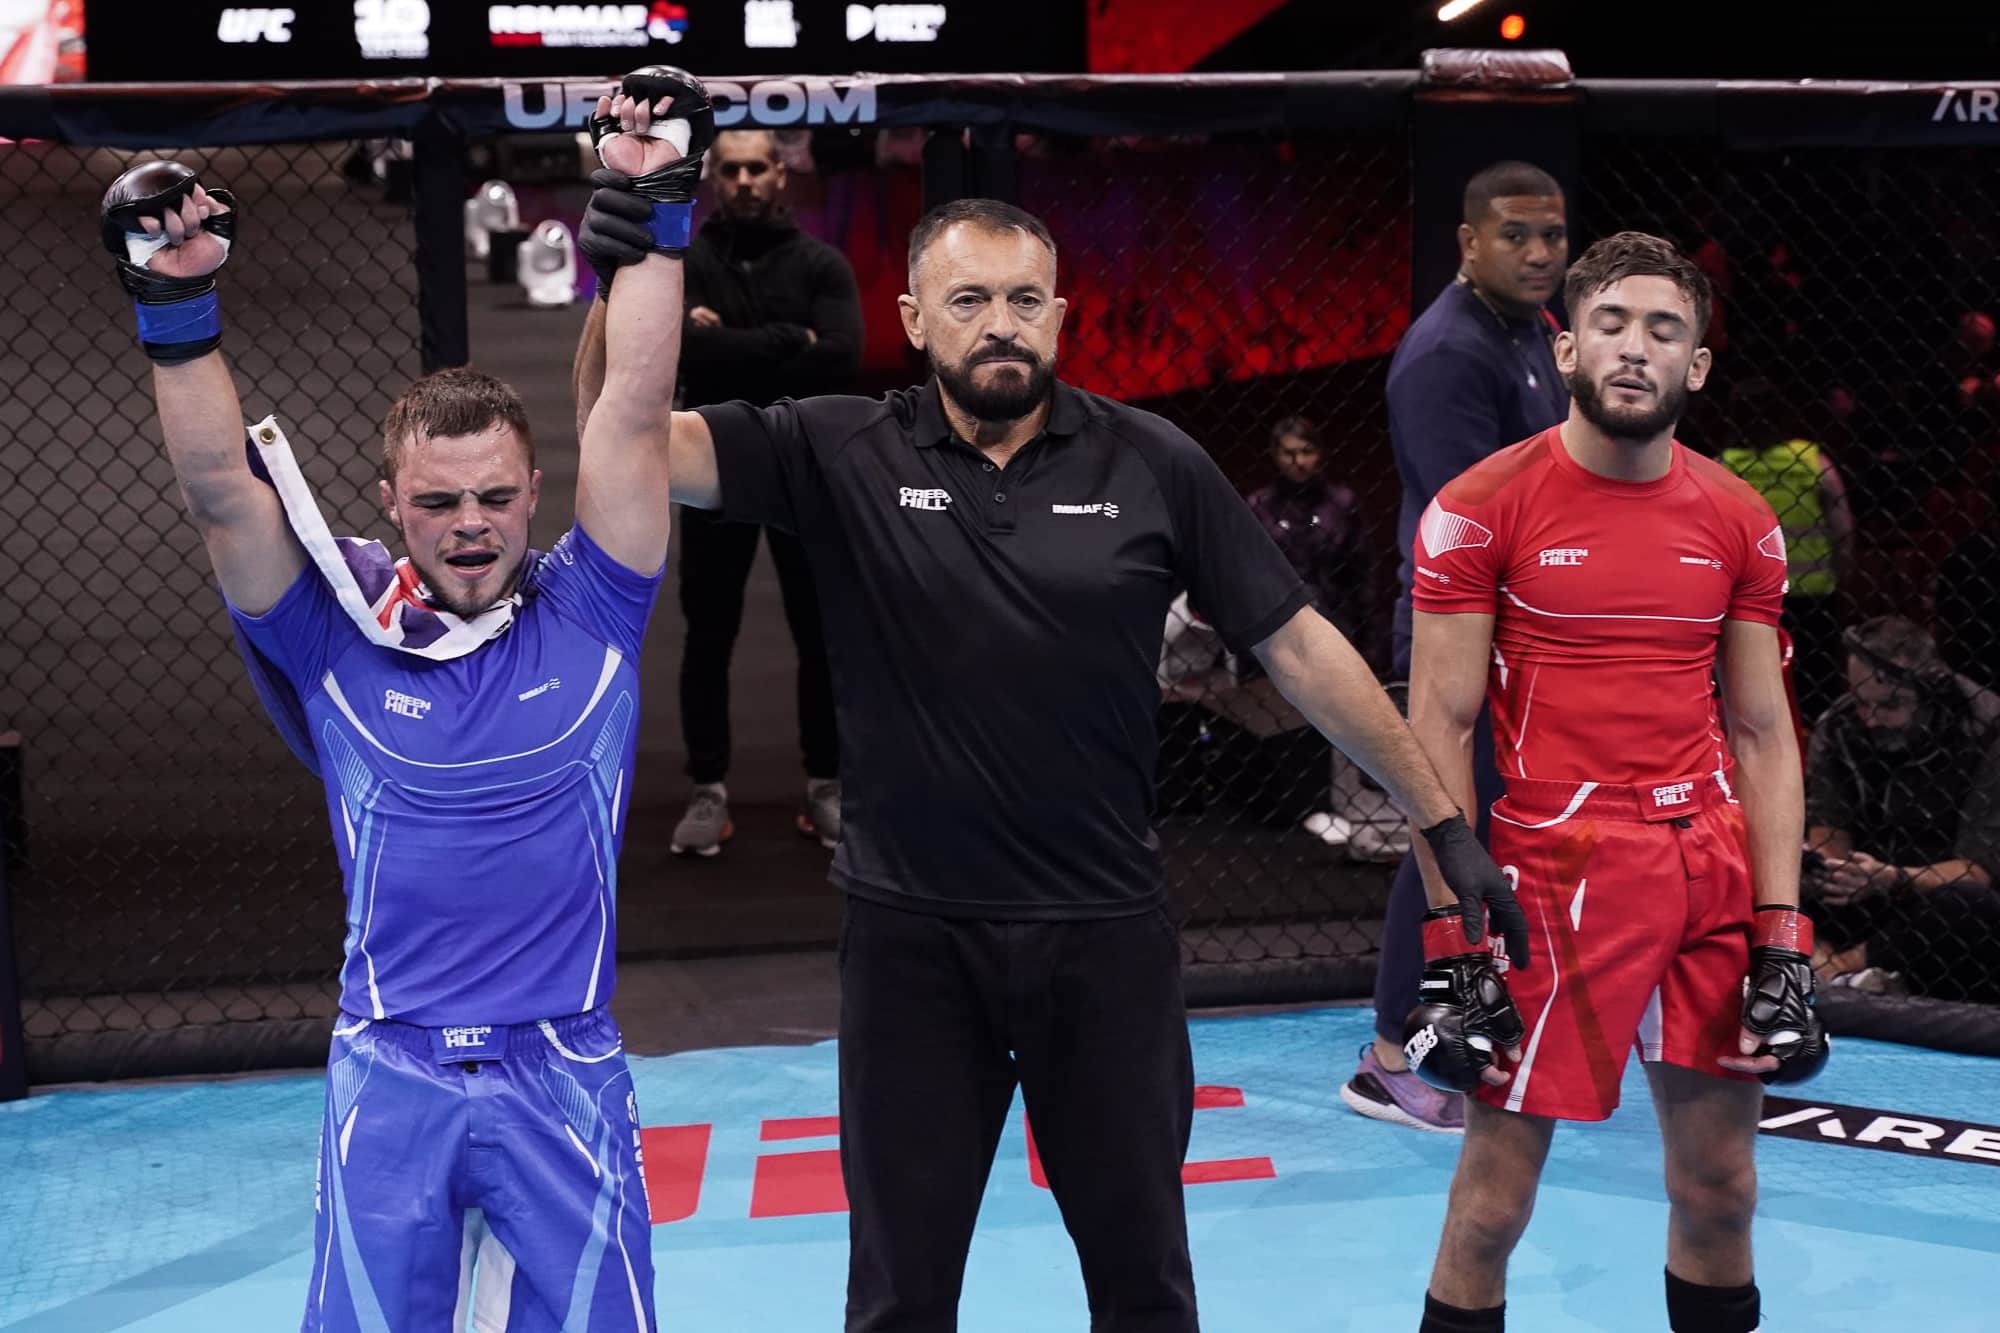 From Youth Olympics to MMA World Championships Final: Kasib Murdoch Ready to Take Gold Back to New Zealand